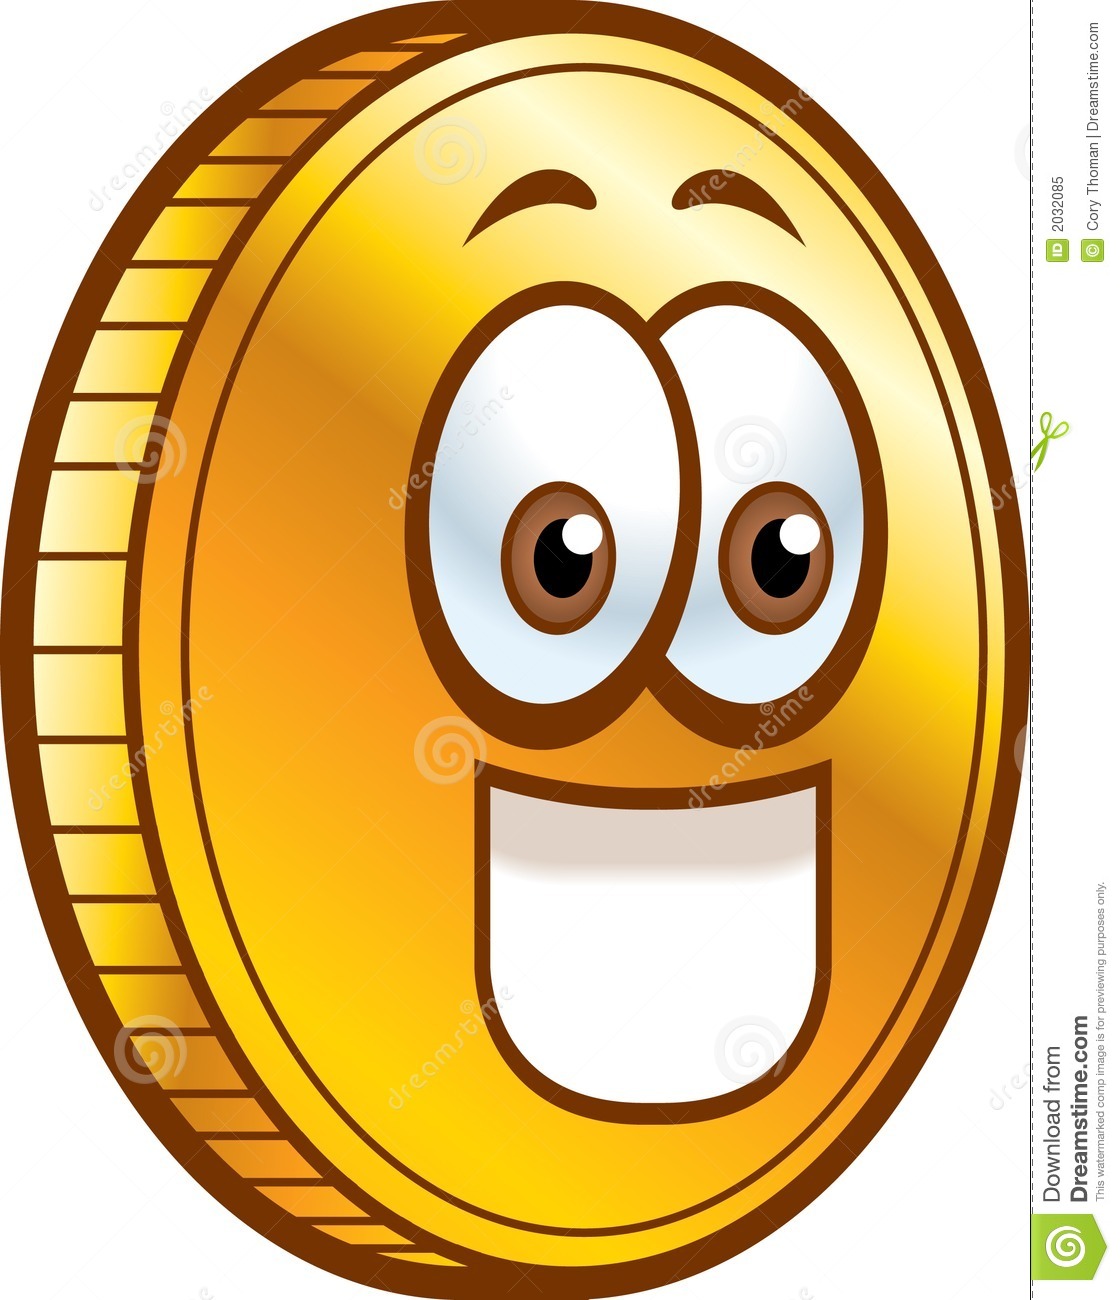 Coin Royalty Free Stock Photo Image 2032085